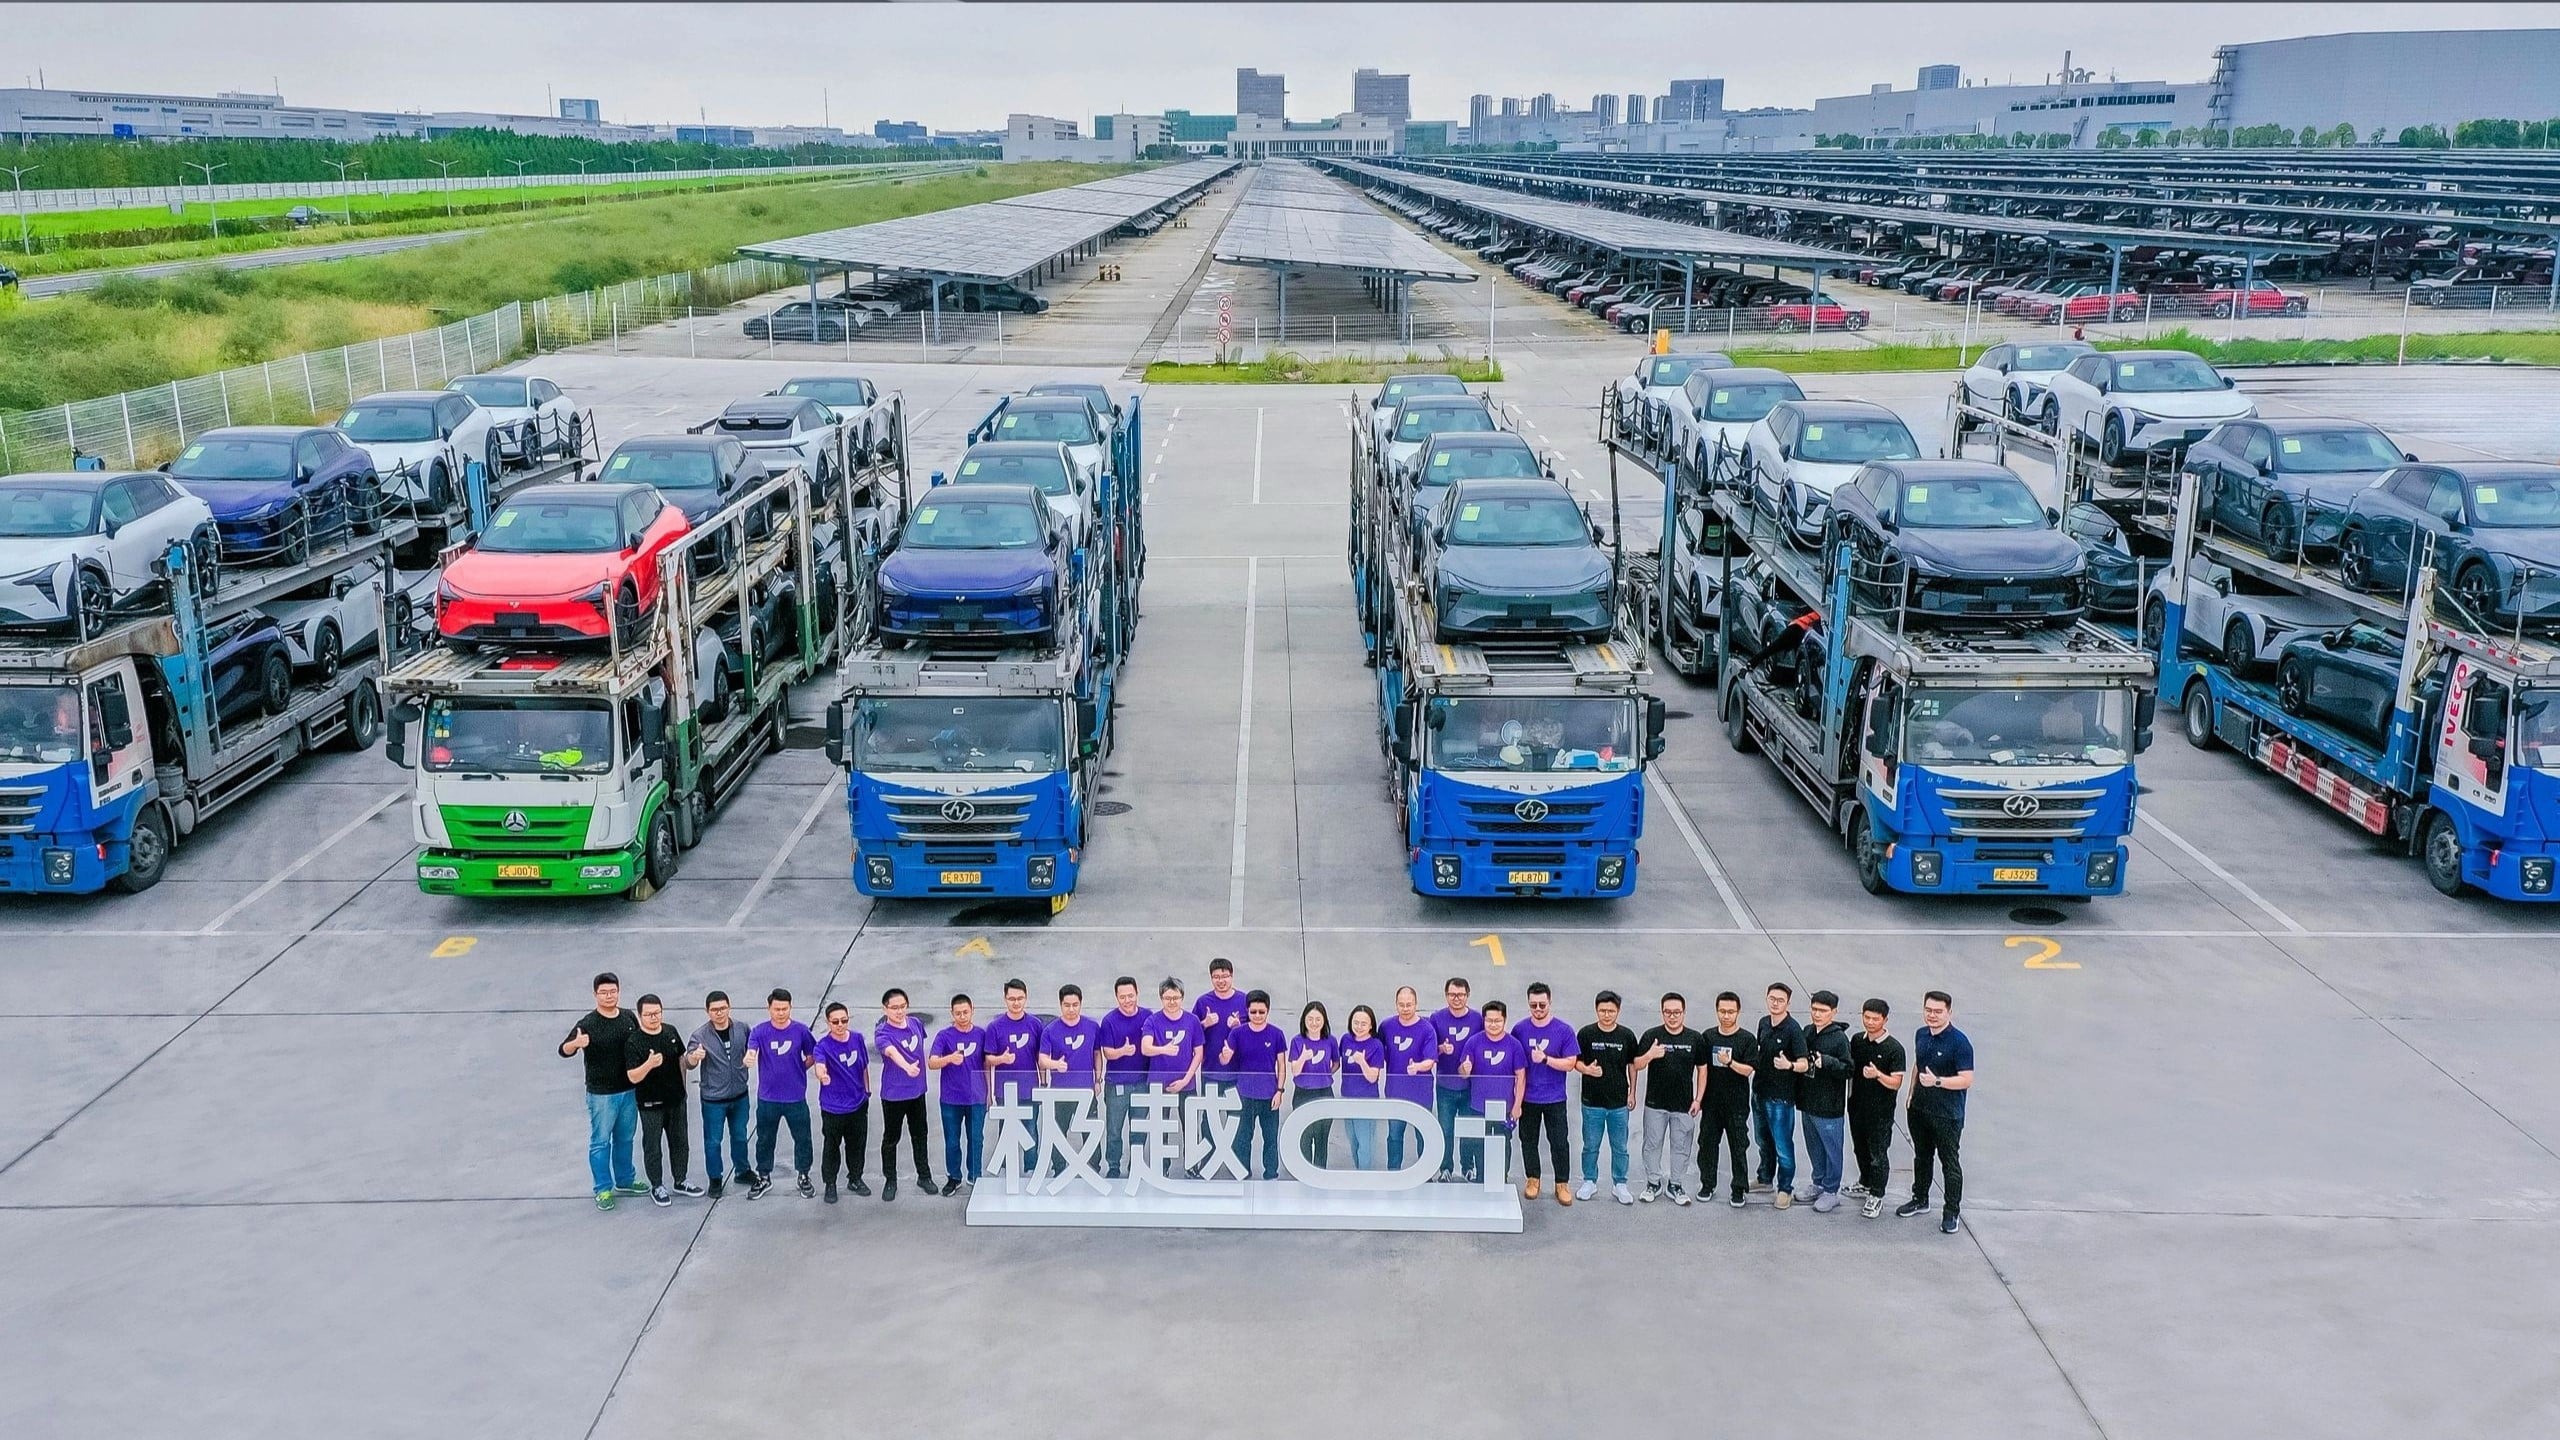 Jiyue 01 from Geely and Baidu is ready for deliveries. Starts at 36,200 USD